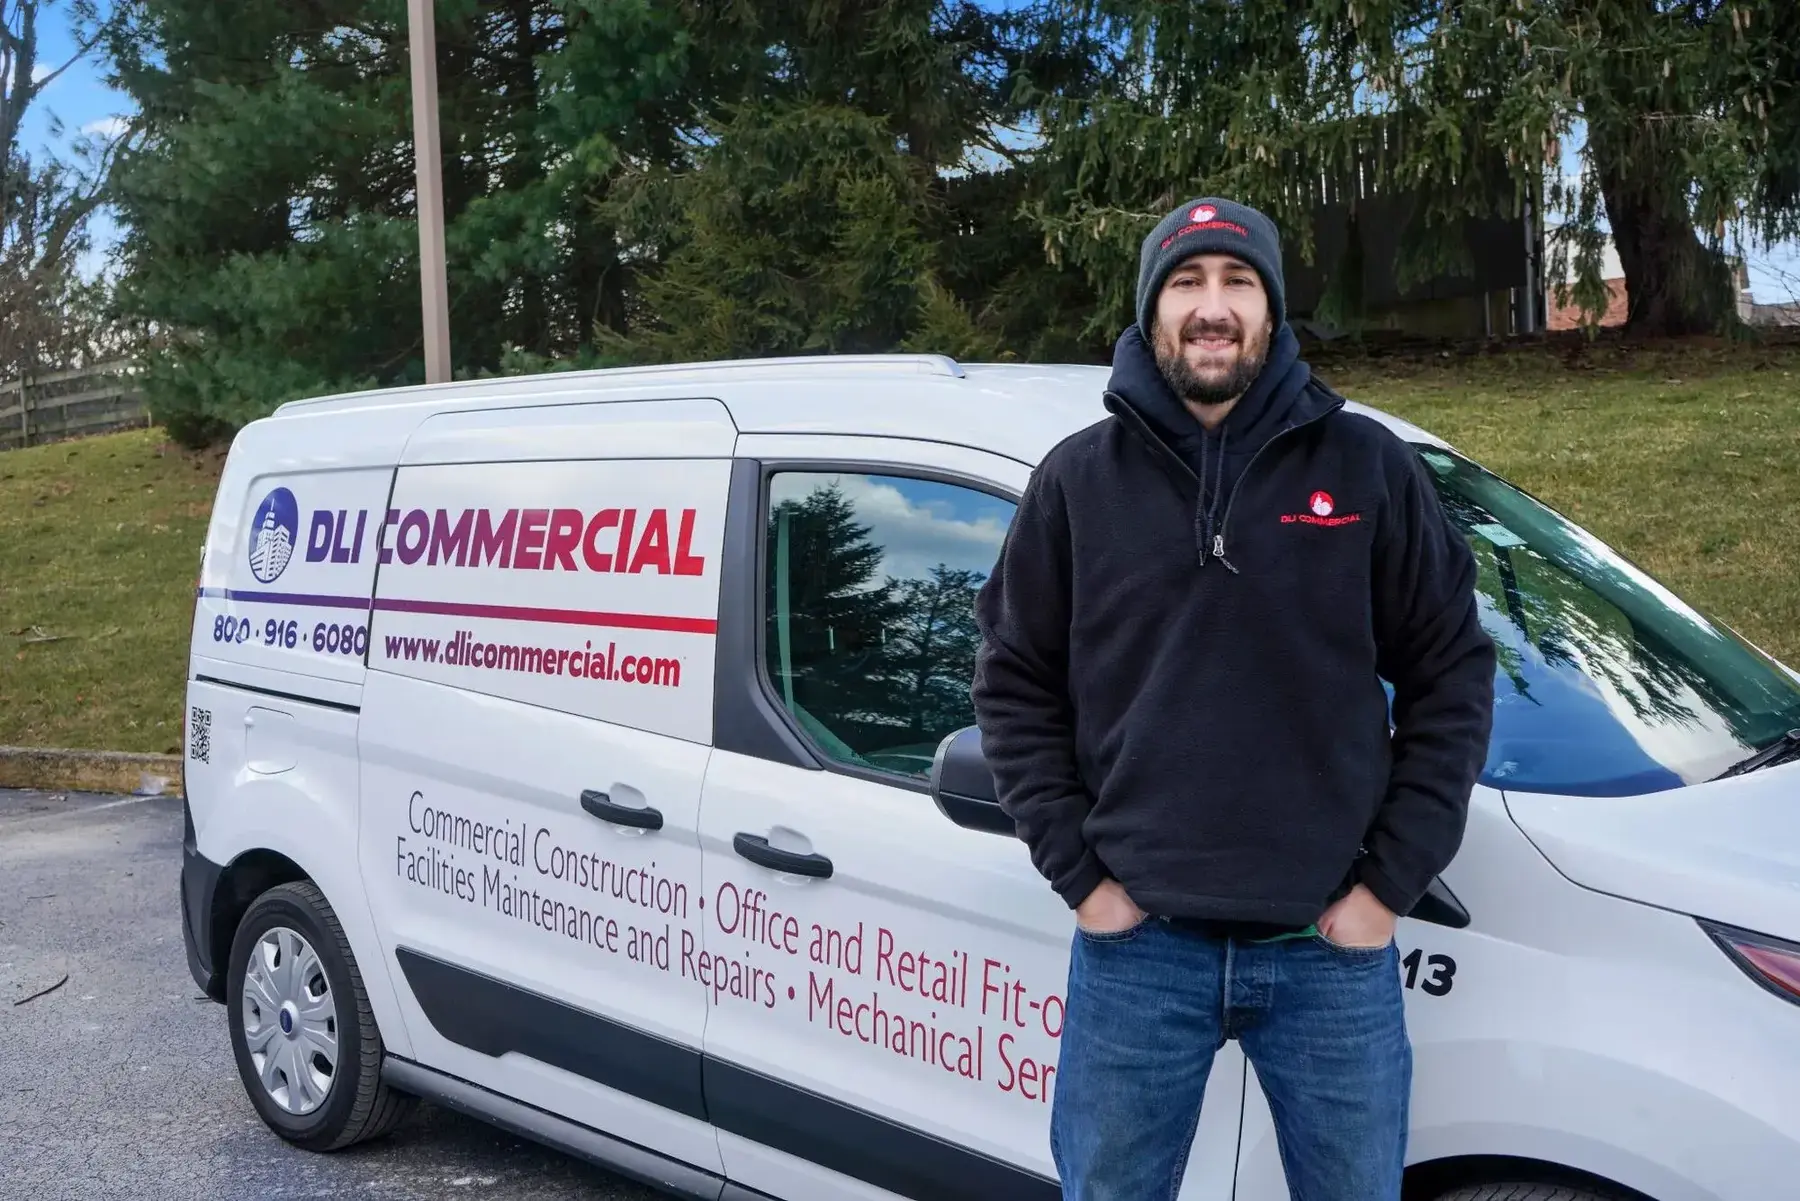 The All-Inclusive Guide to DLI Commercial Handyman Services